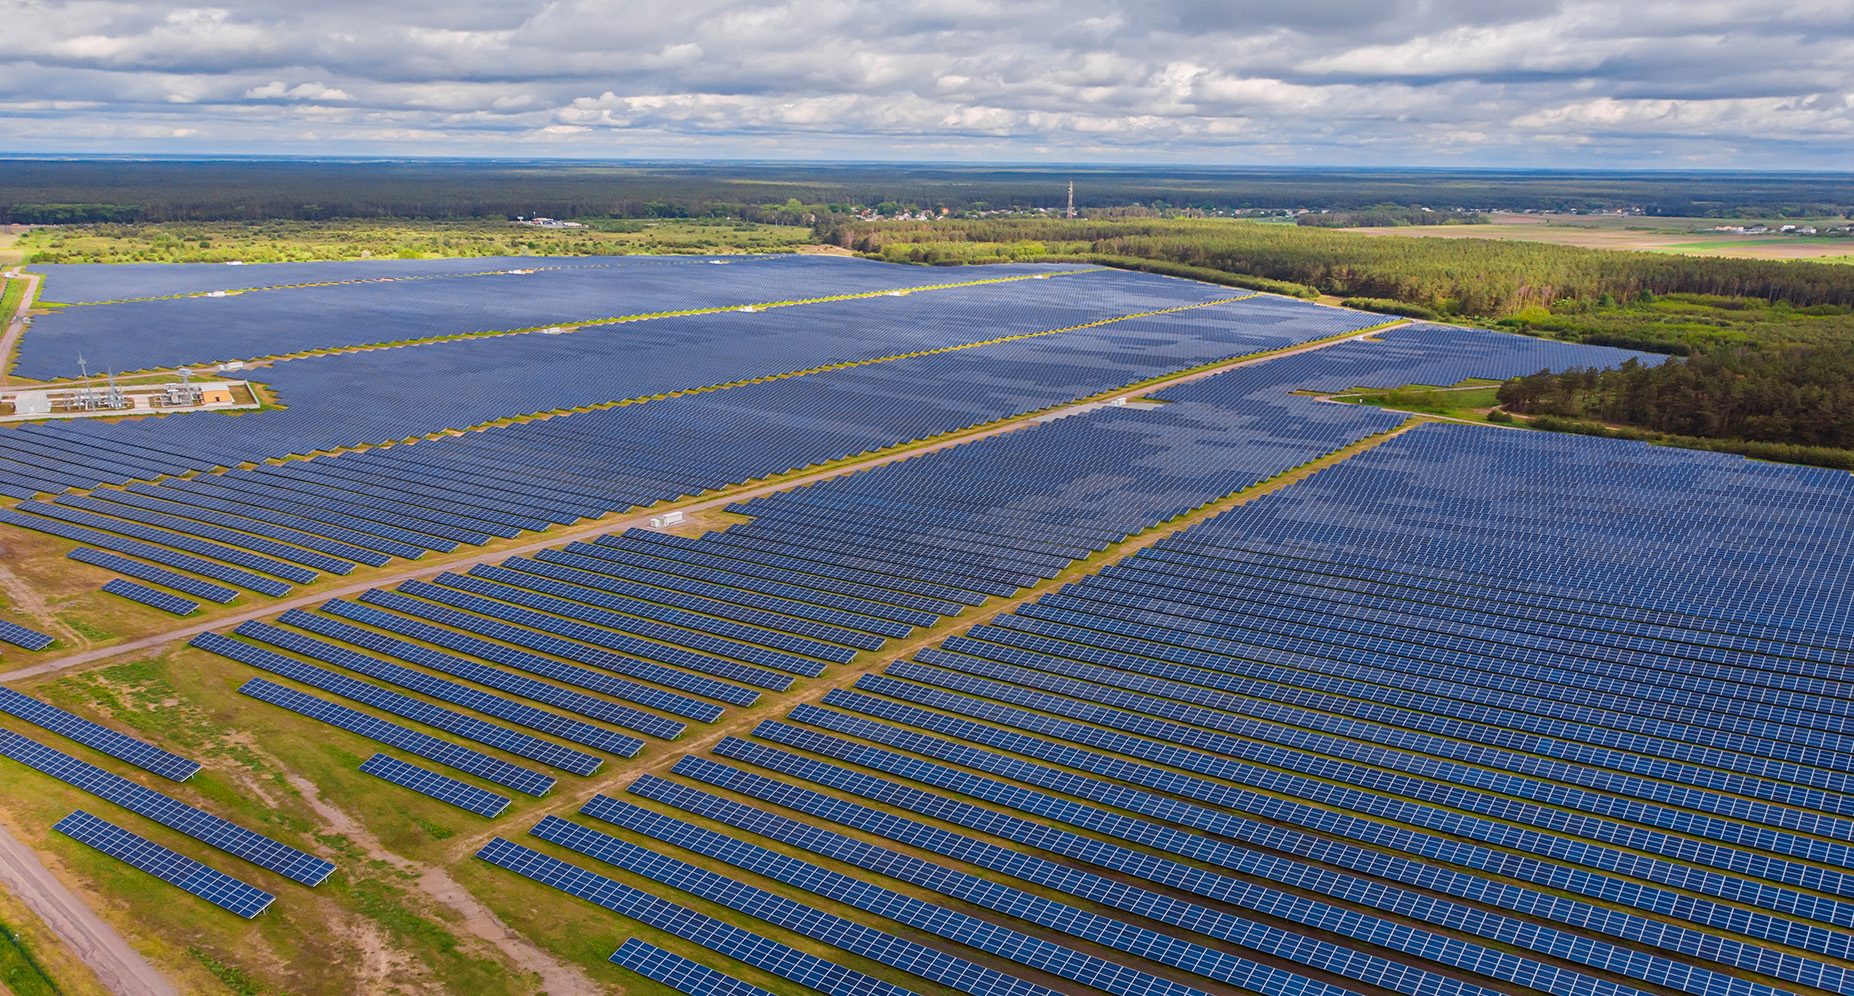 About the five largest solar plants in the world